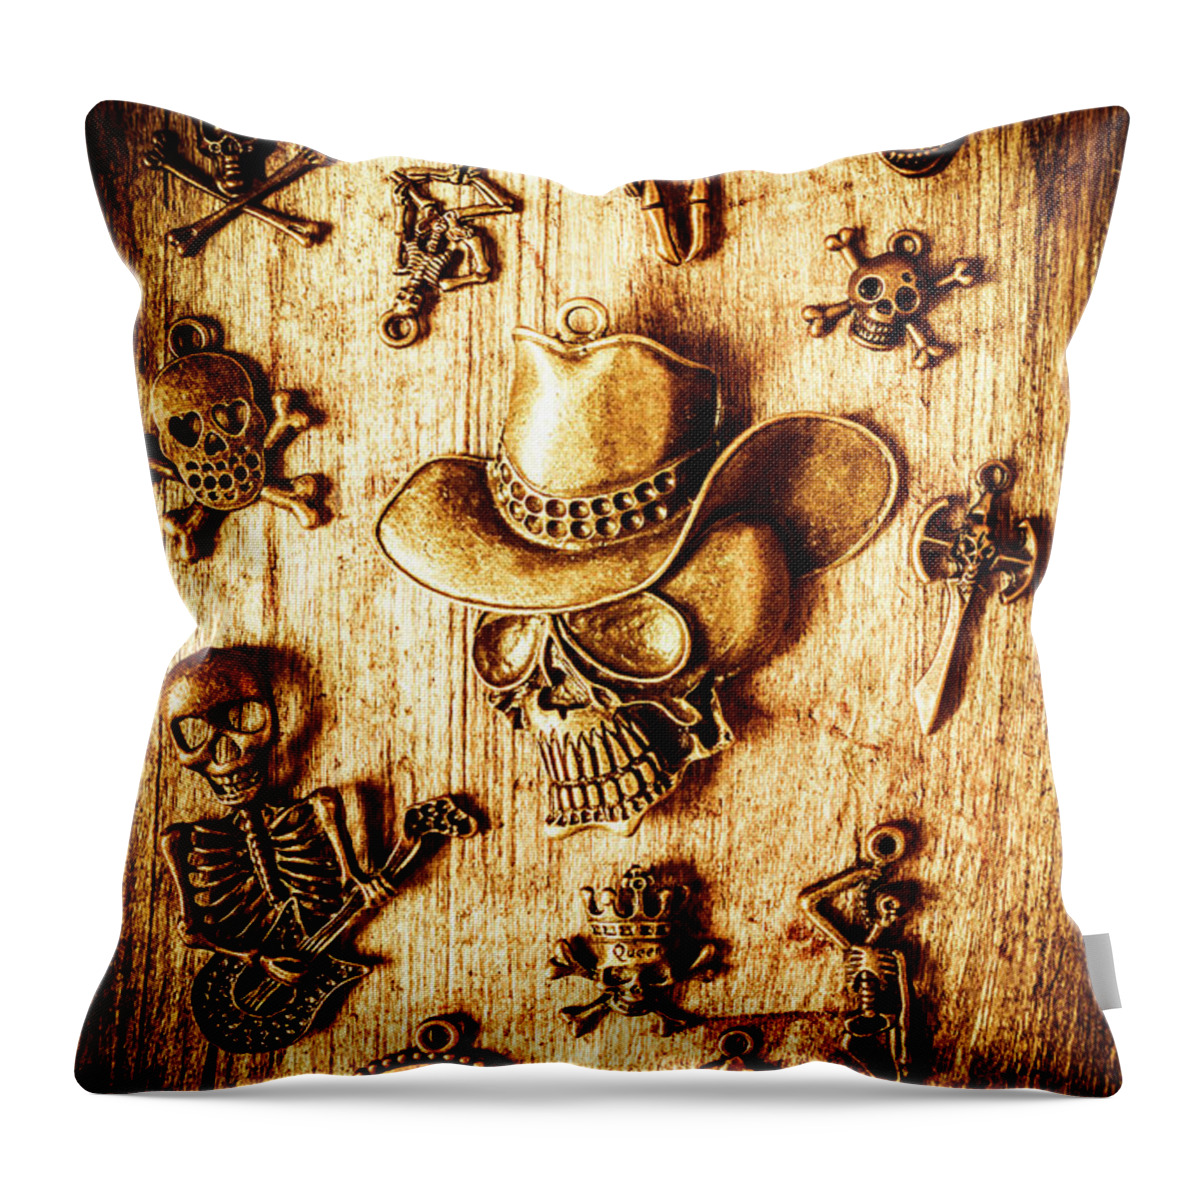 Skeleton Throw Pillow featuring the photograph Skeleton pendant party by Jorgo Photography